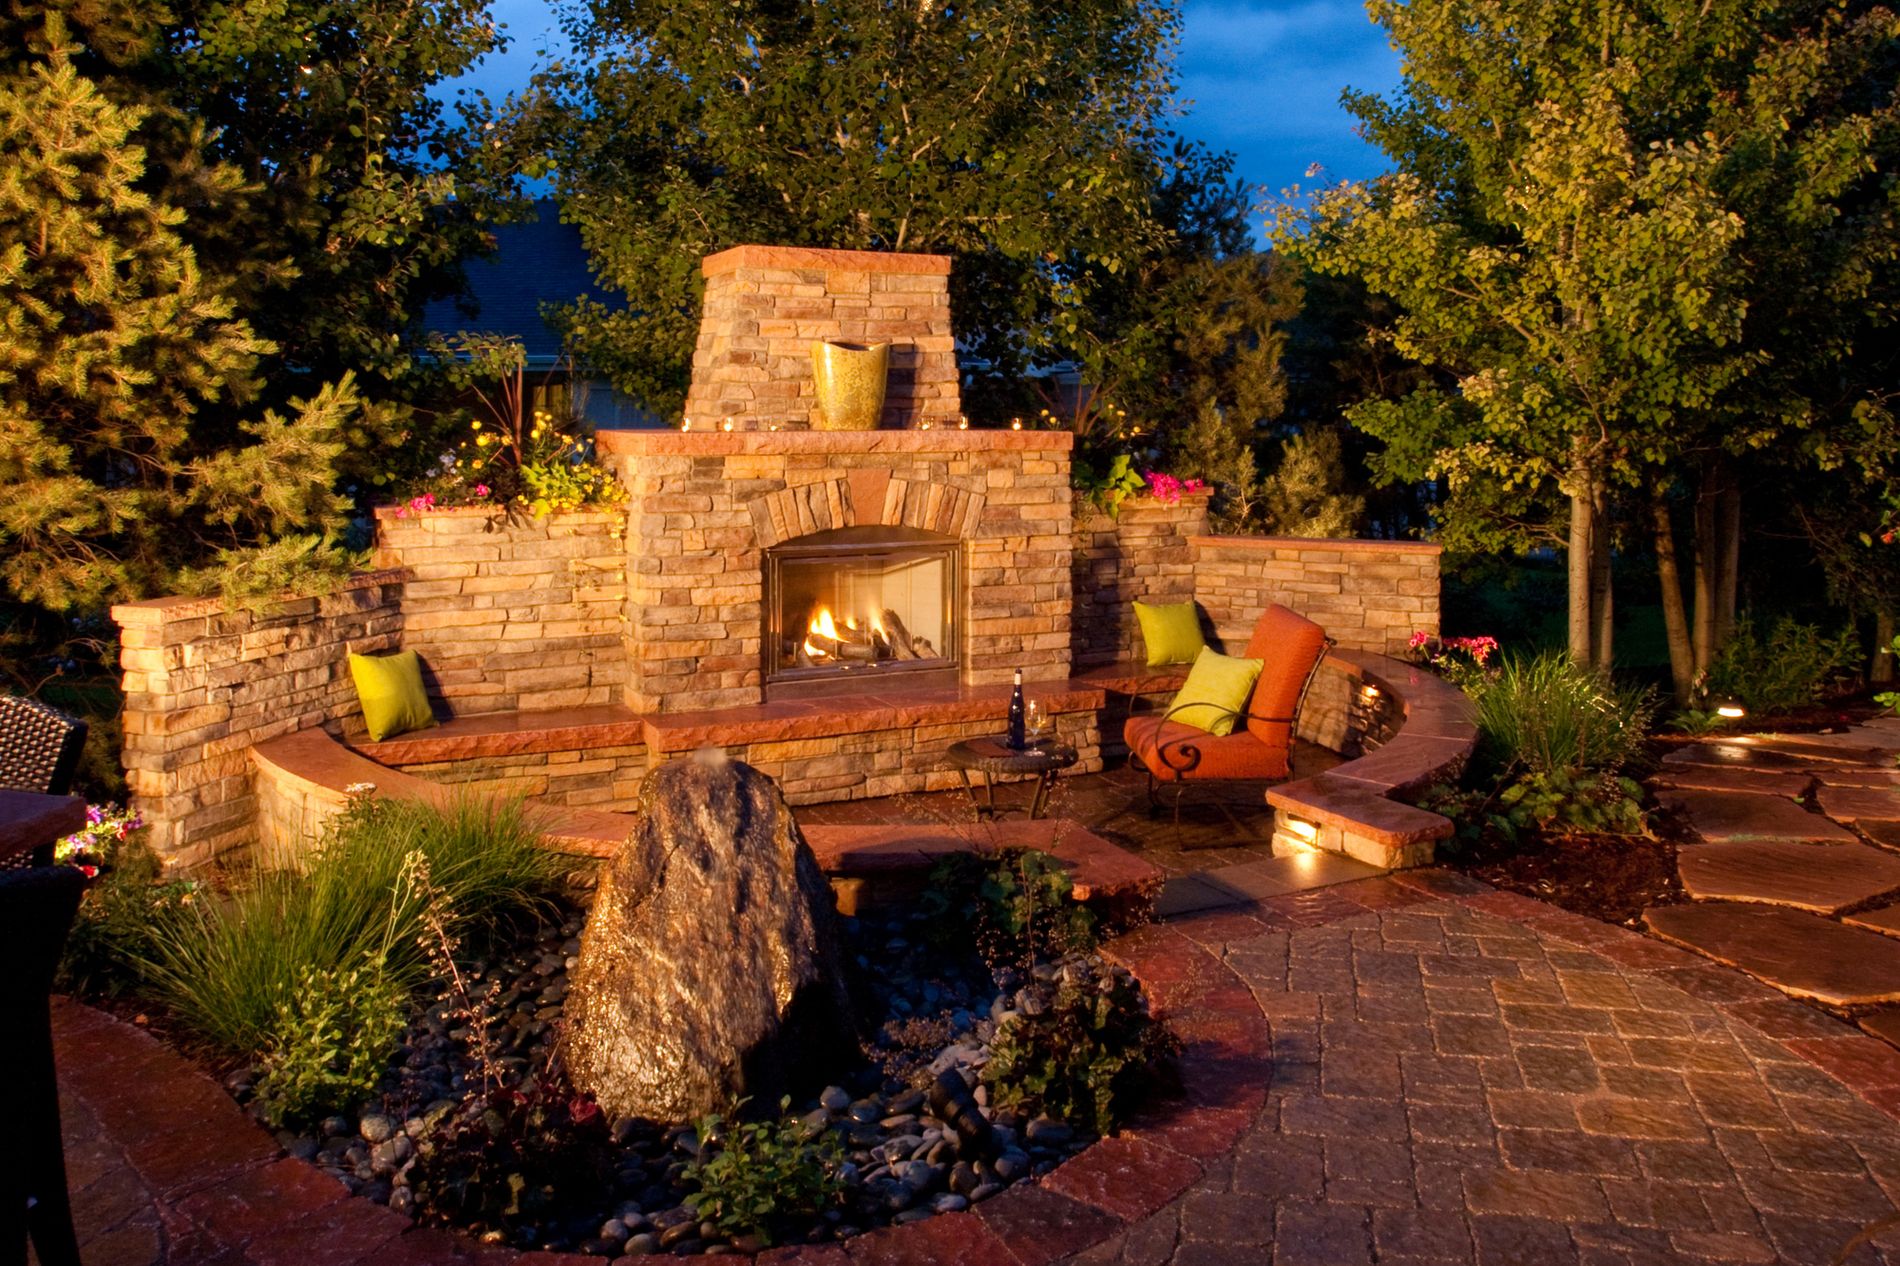 Outdoor Fireplace with stone veneer and Colorado red sandstone caps